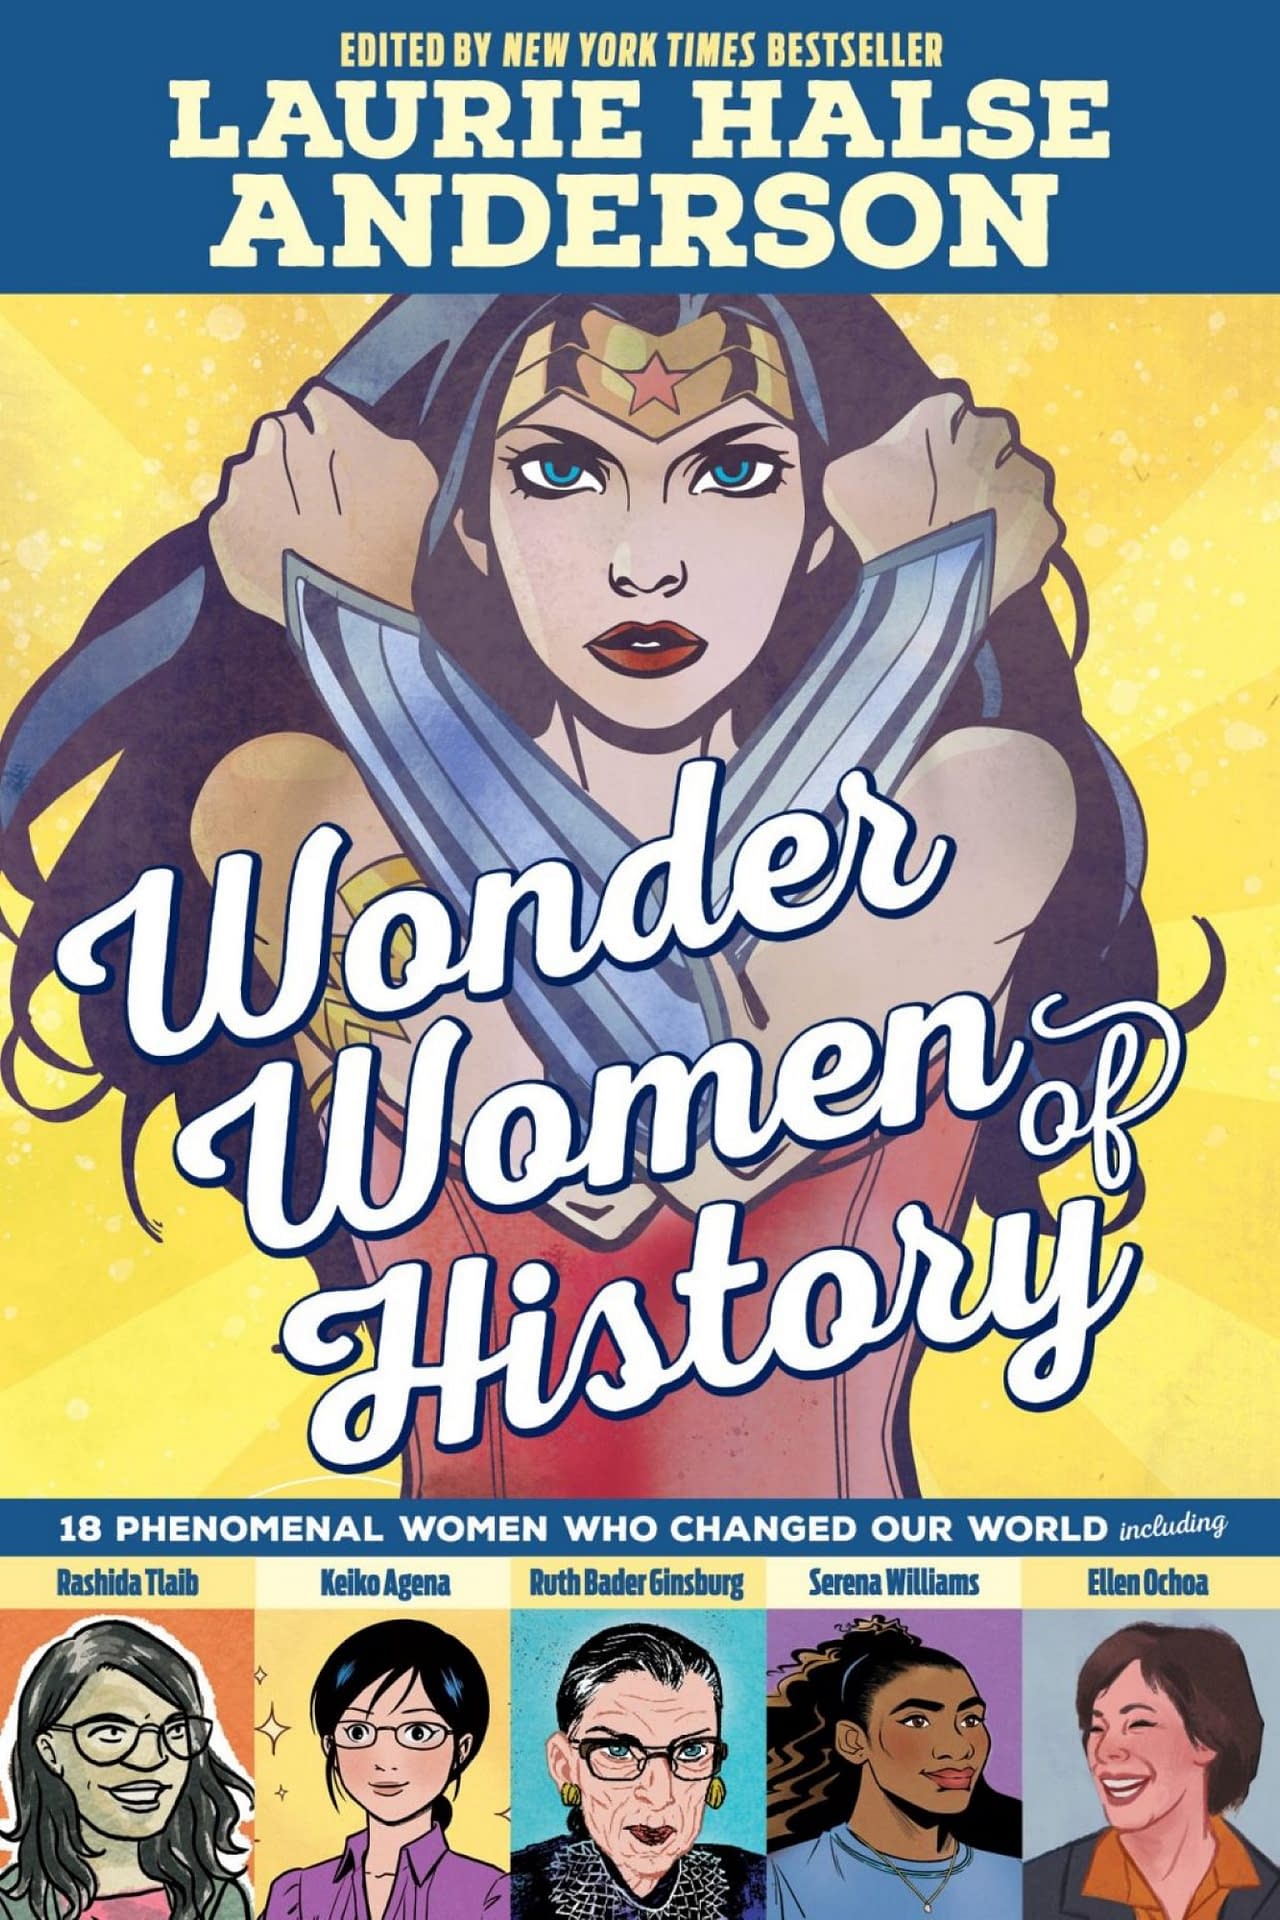 Wonder Woman 1984 Delayed Again? DC Cancels Tie-In Covers For December